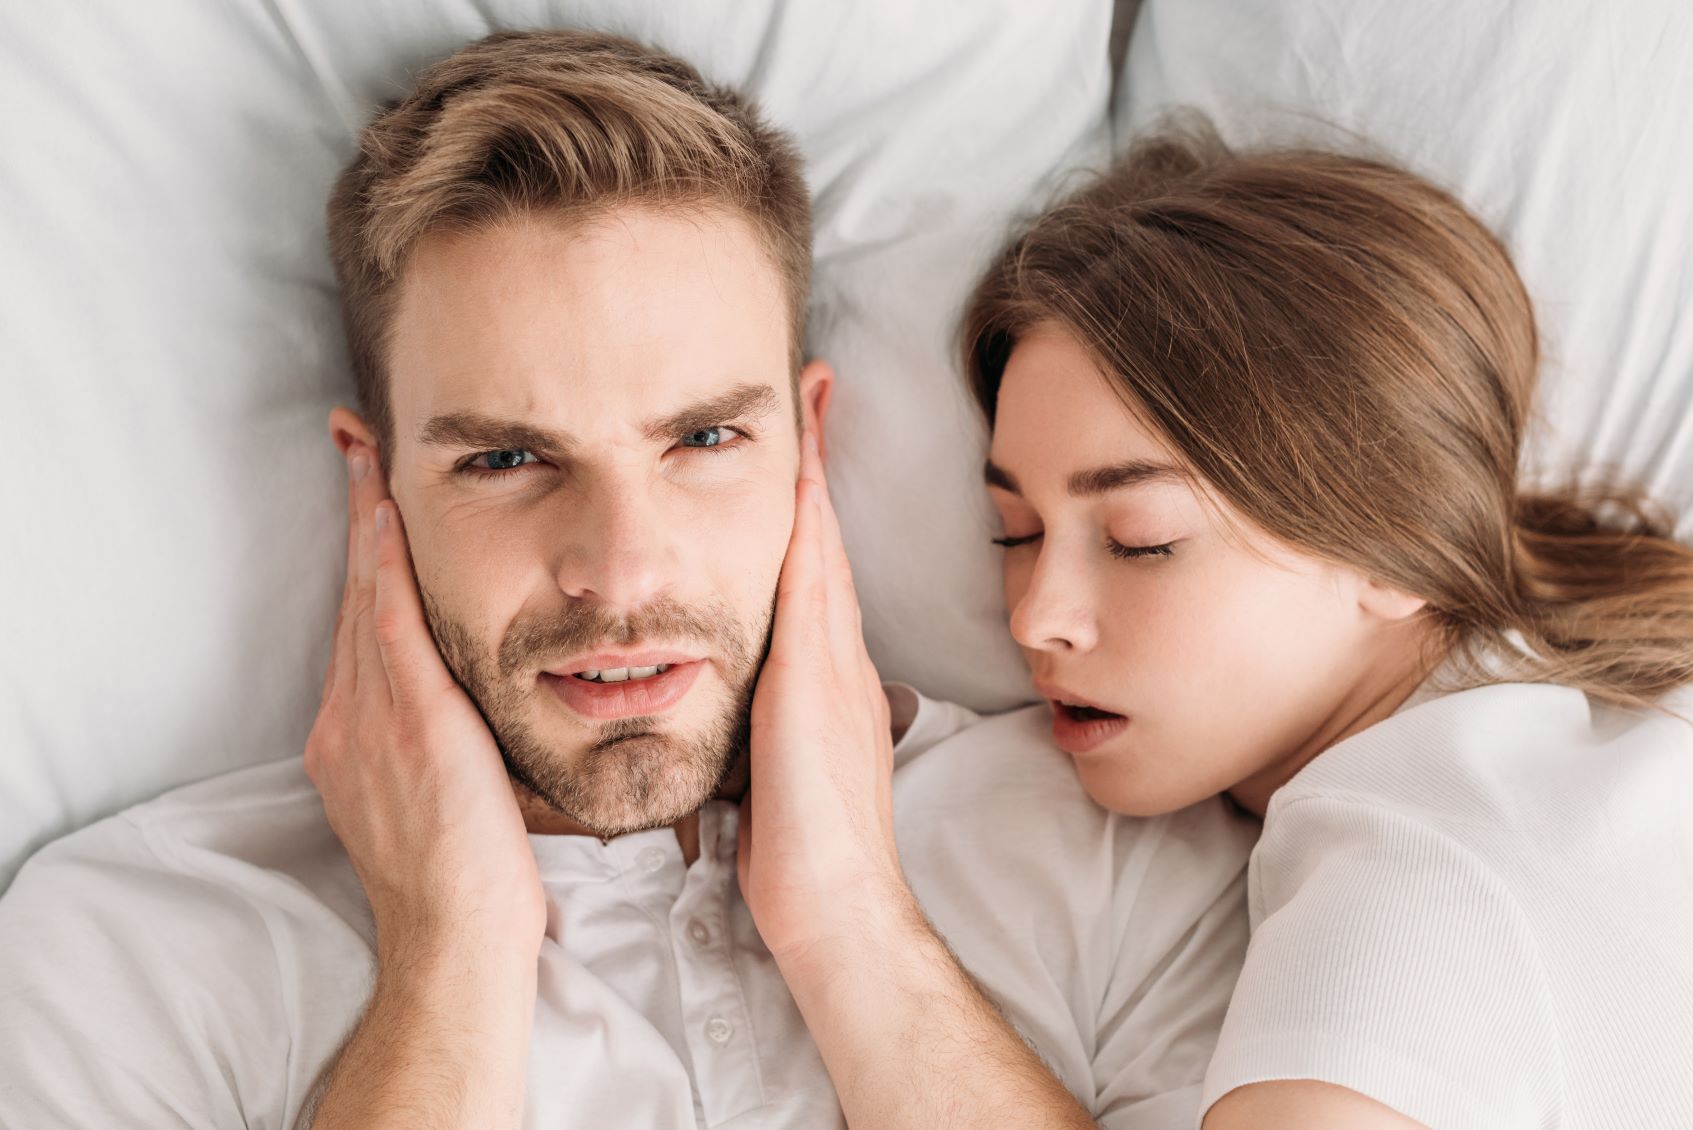 Man unable to sleep because of wife snoring.